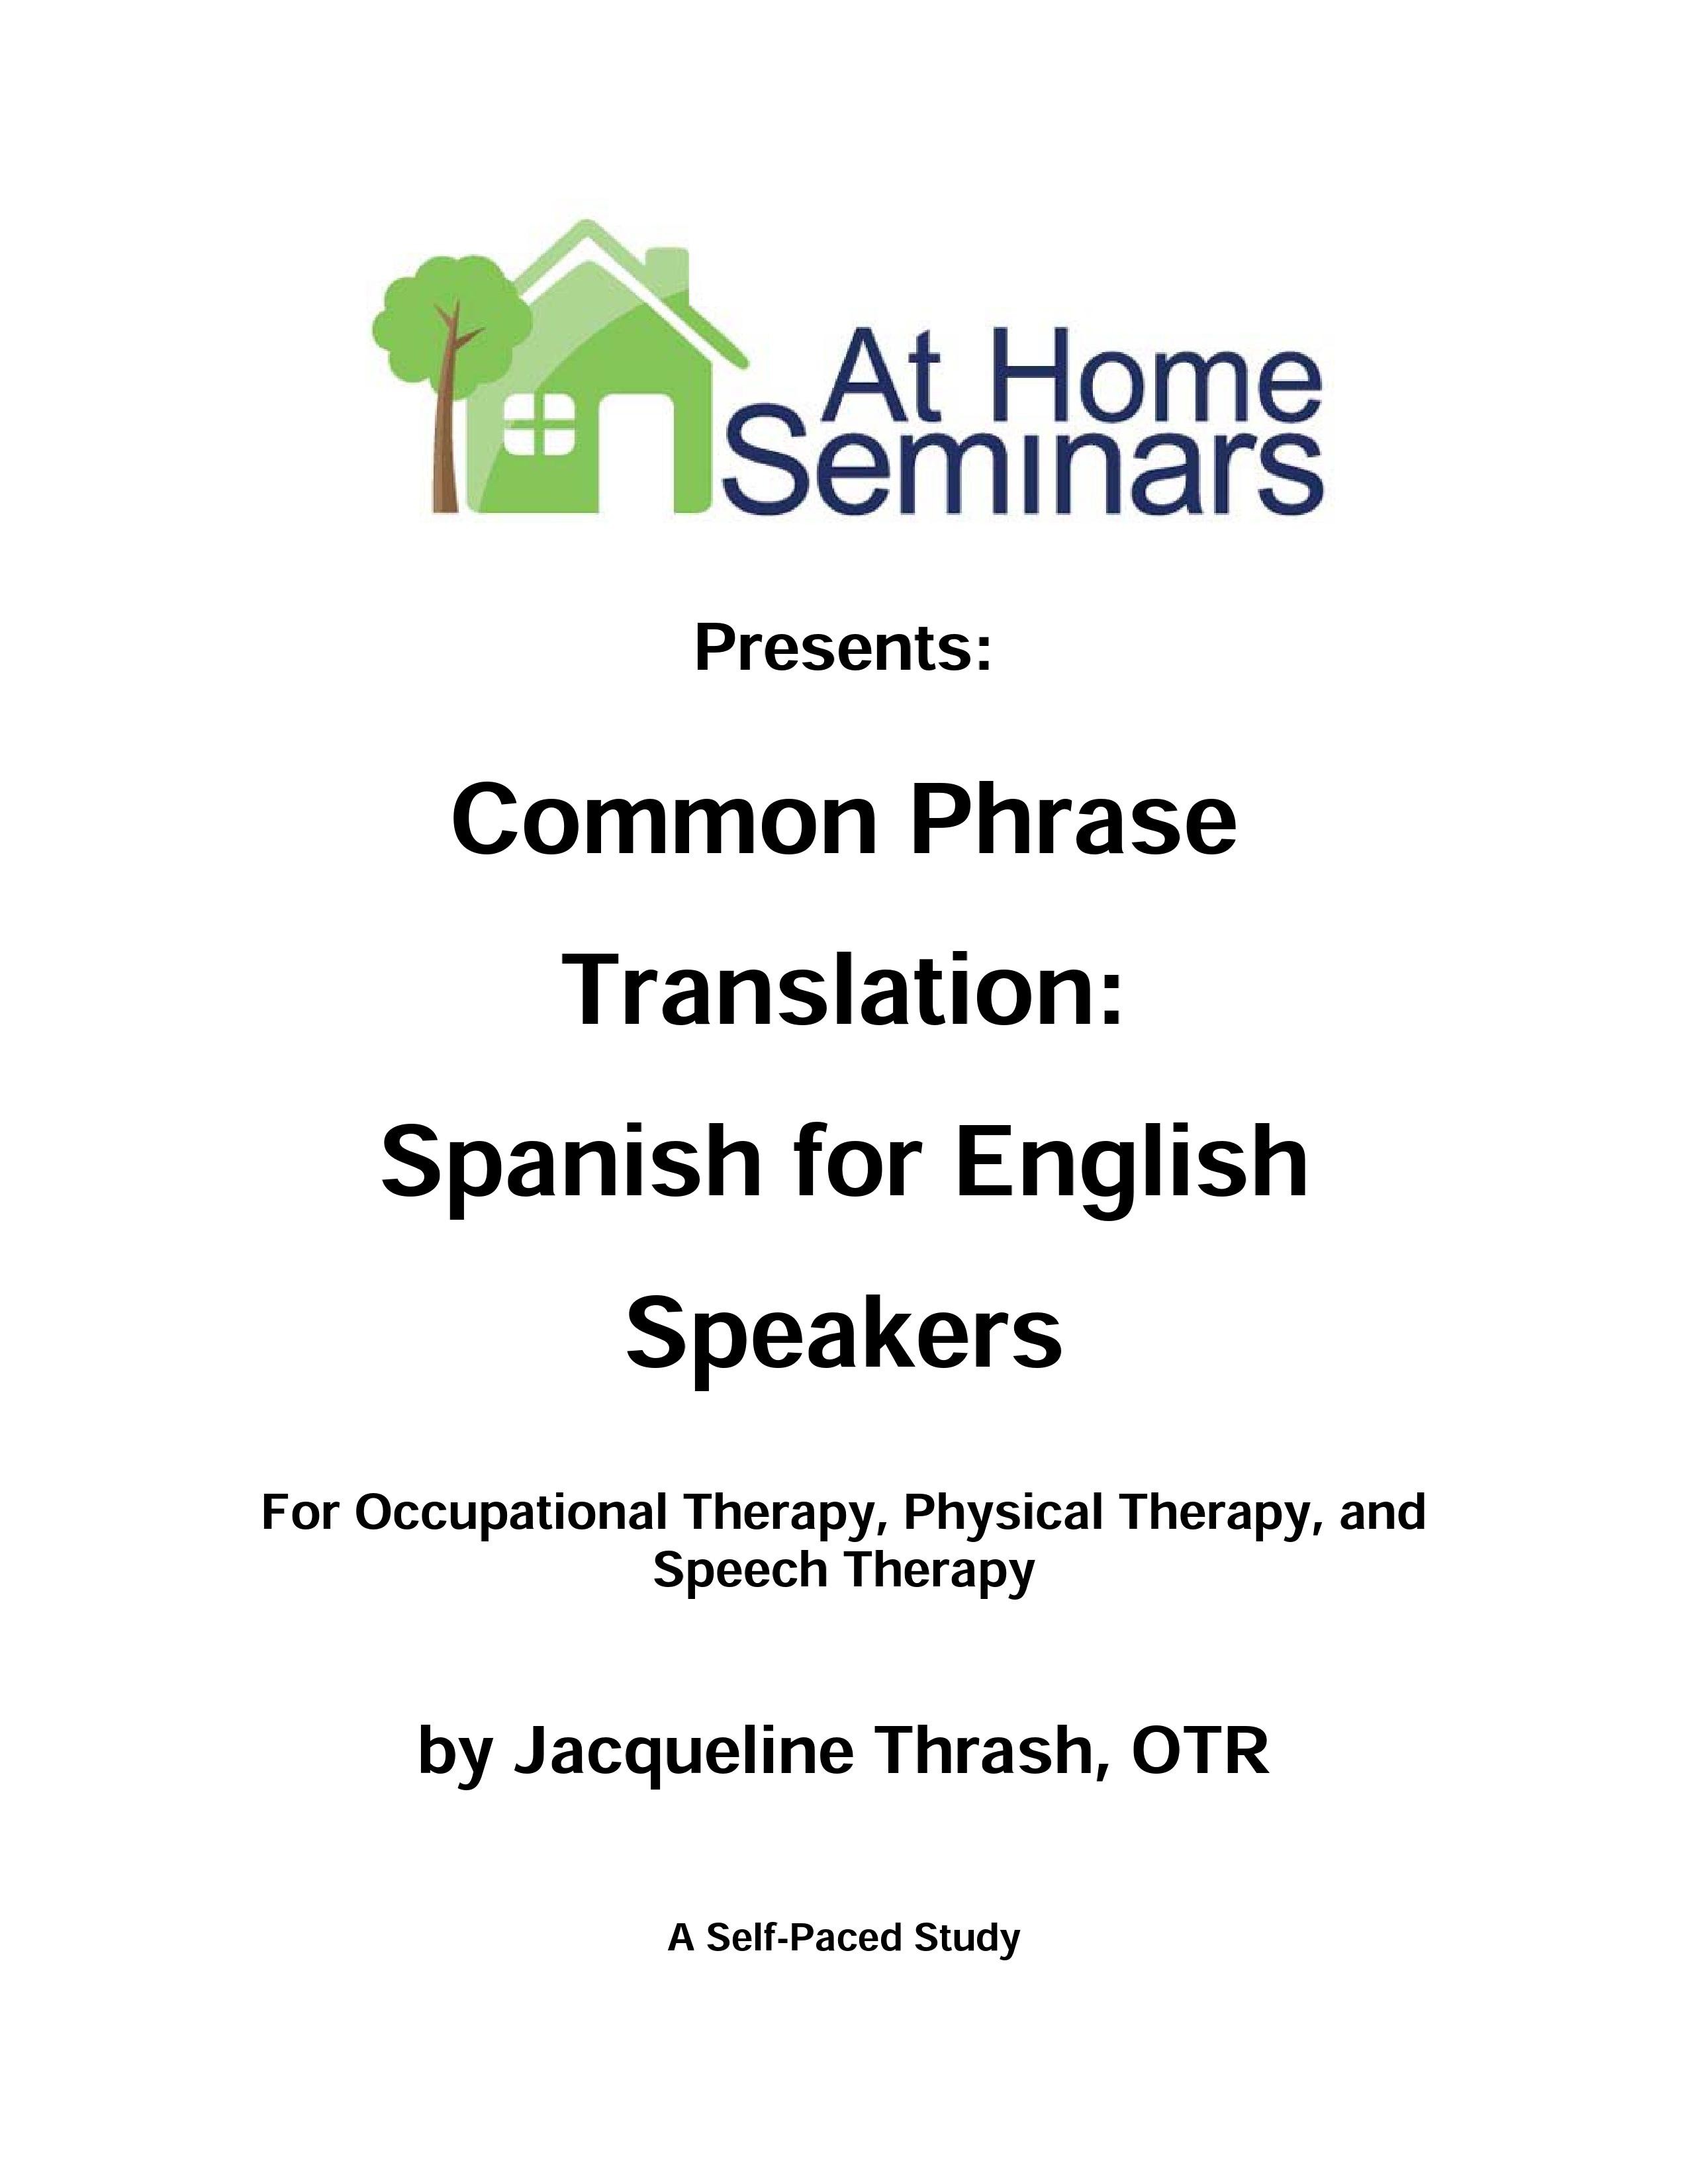 Share A Course: Common Phrase Translation: Spanish for English Speakers: Physical Therapy 